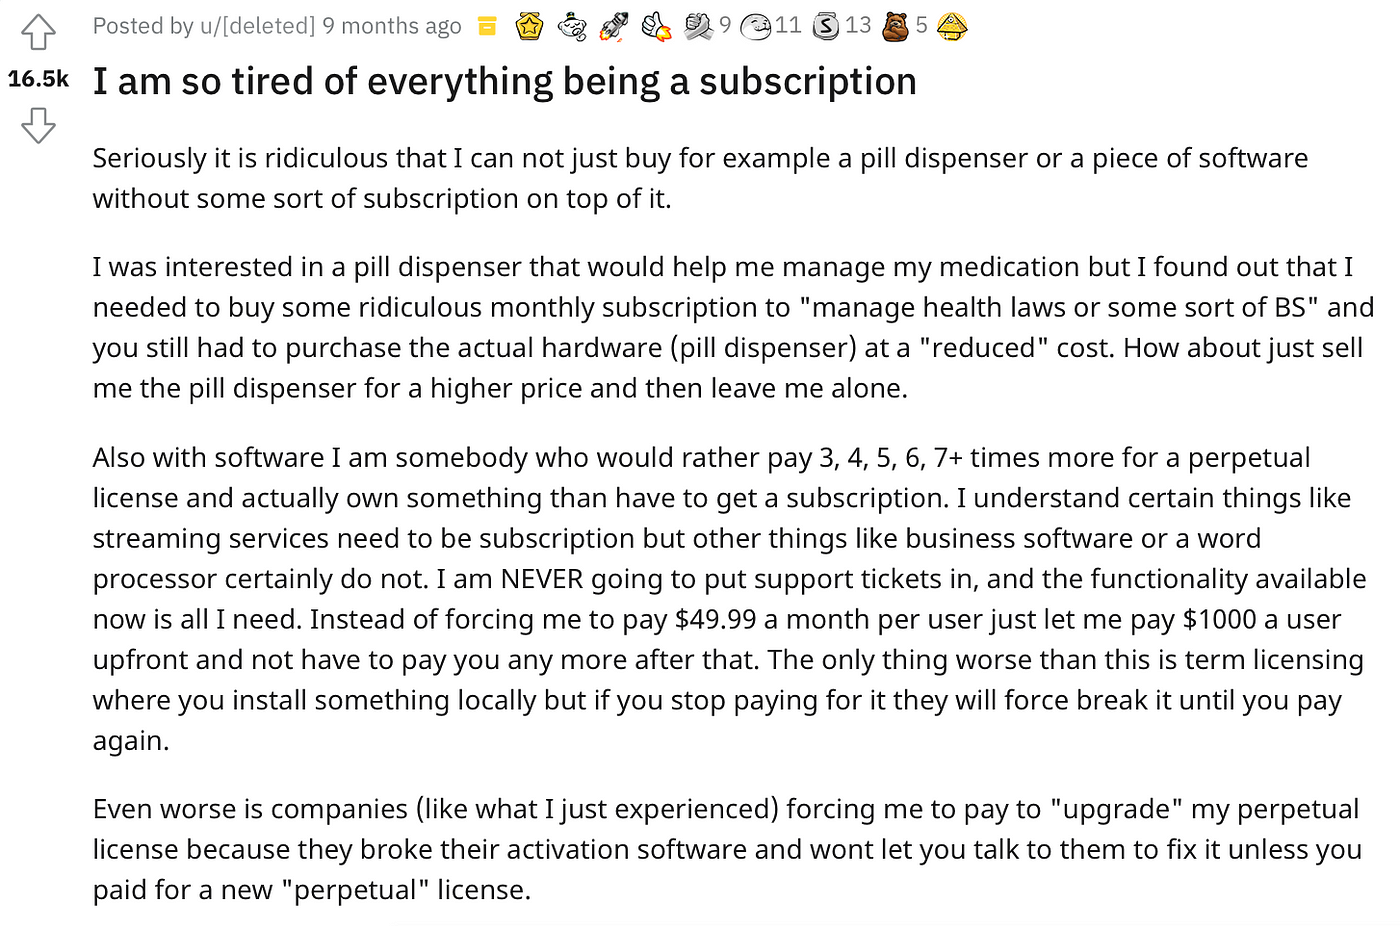 A screenshot from Reddit which details why they are getting tired with subscriptions. Particularly subscriptions for software products